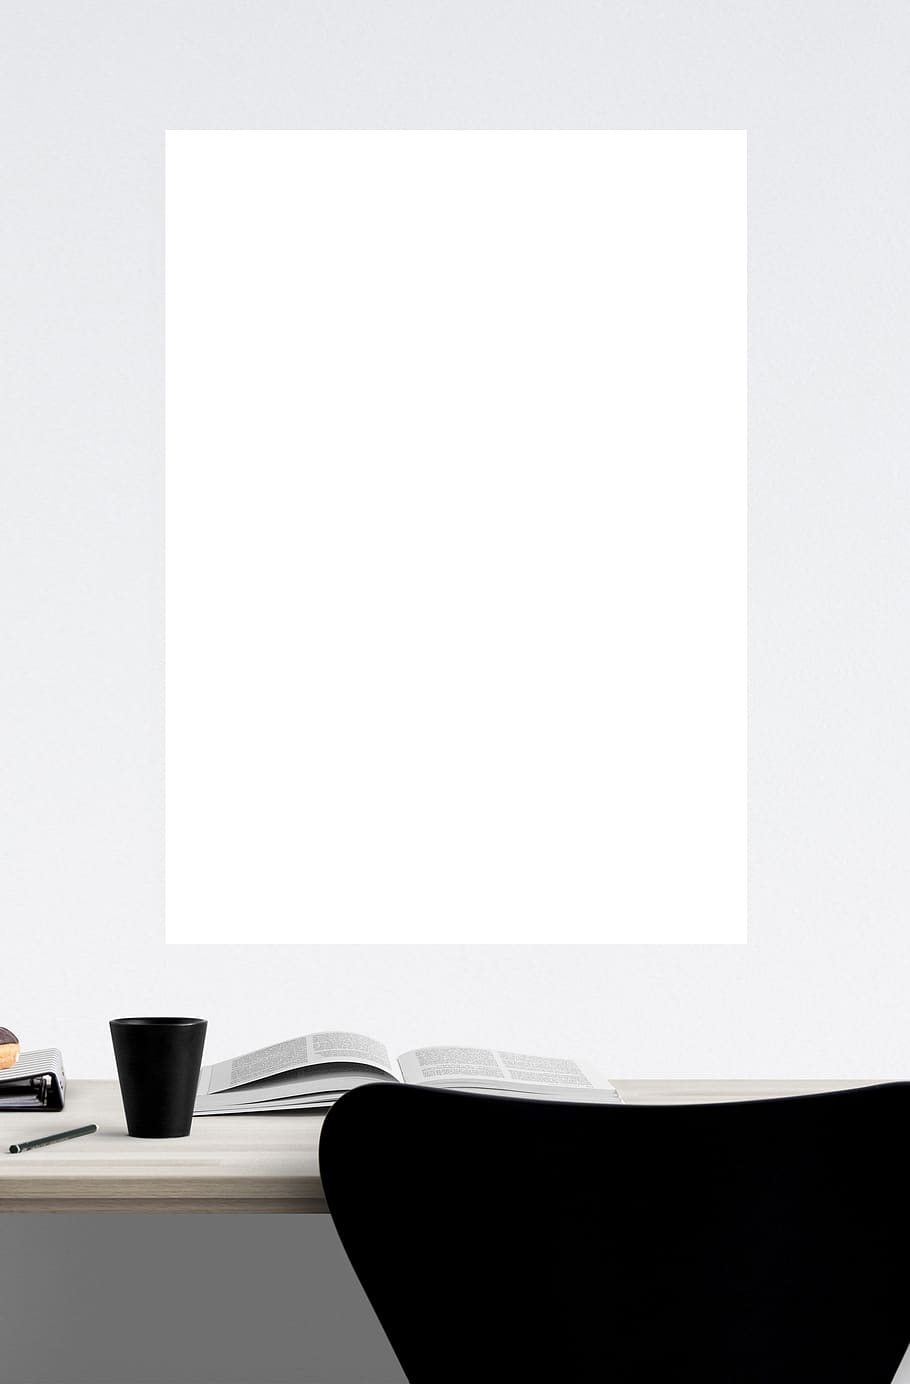 poster, frame, template, chair, book, wall, indoors, copy space, table, absence